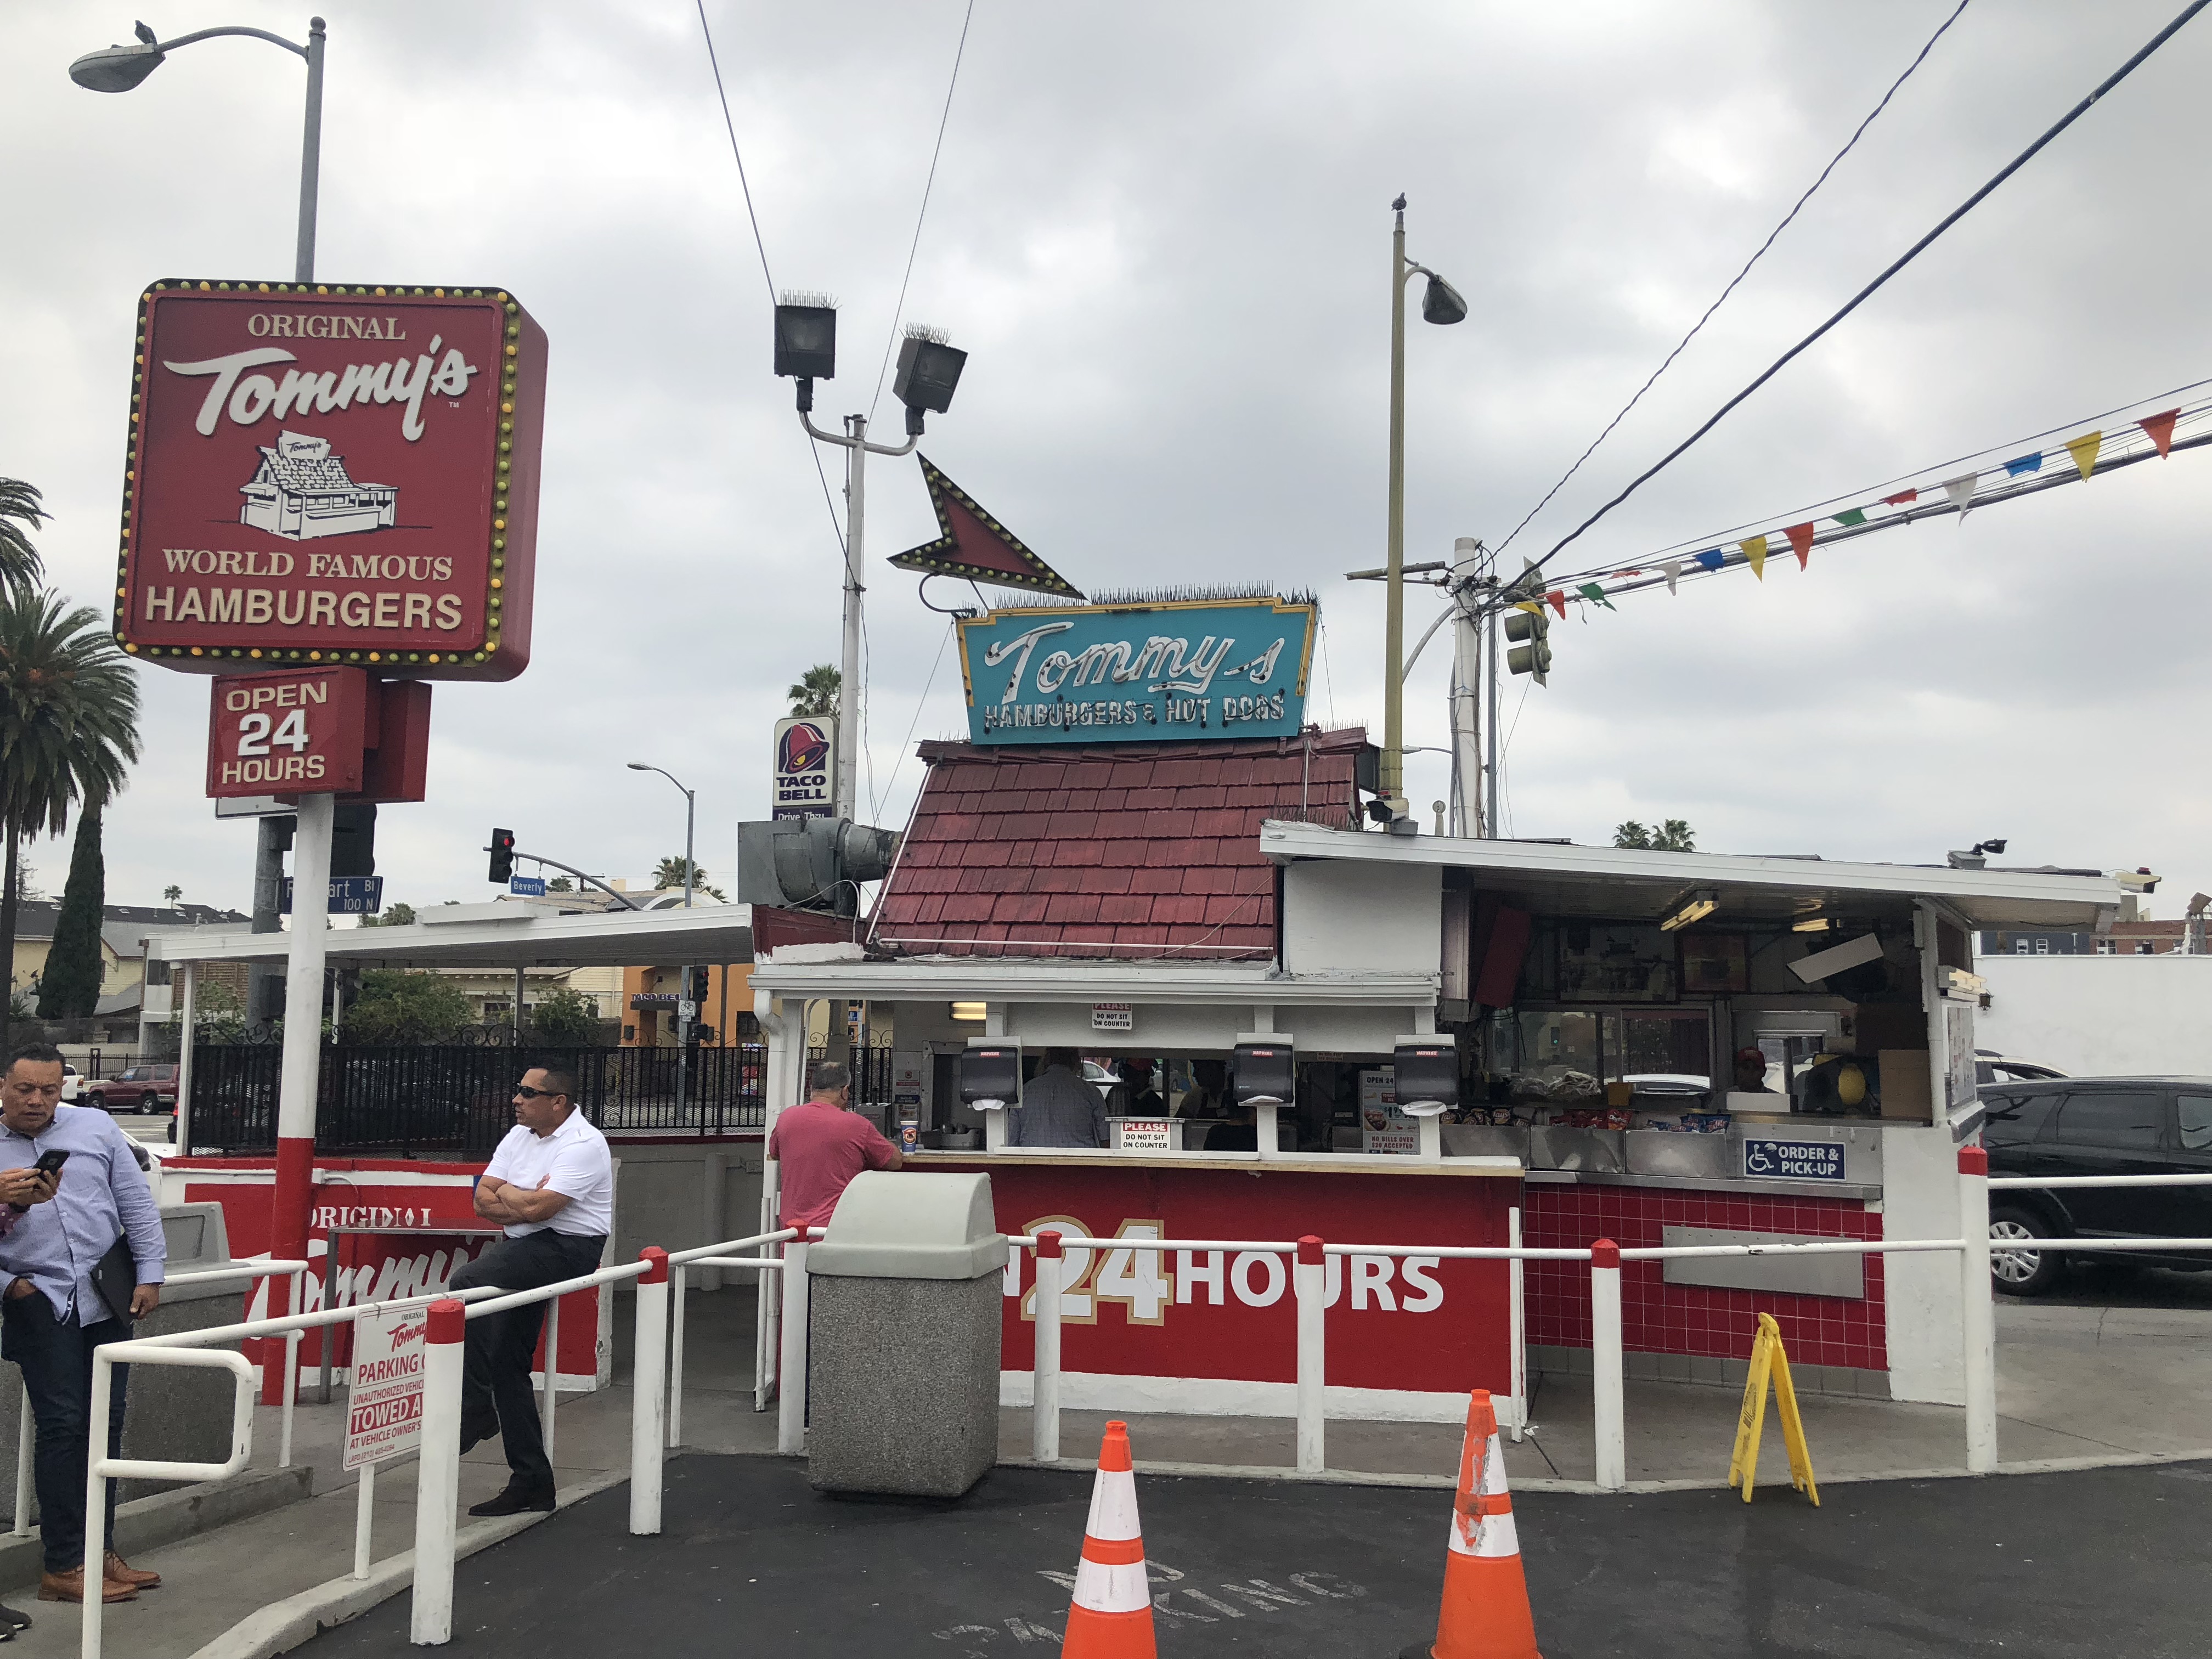 tommys-original-world-famous-burgers